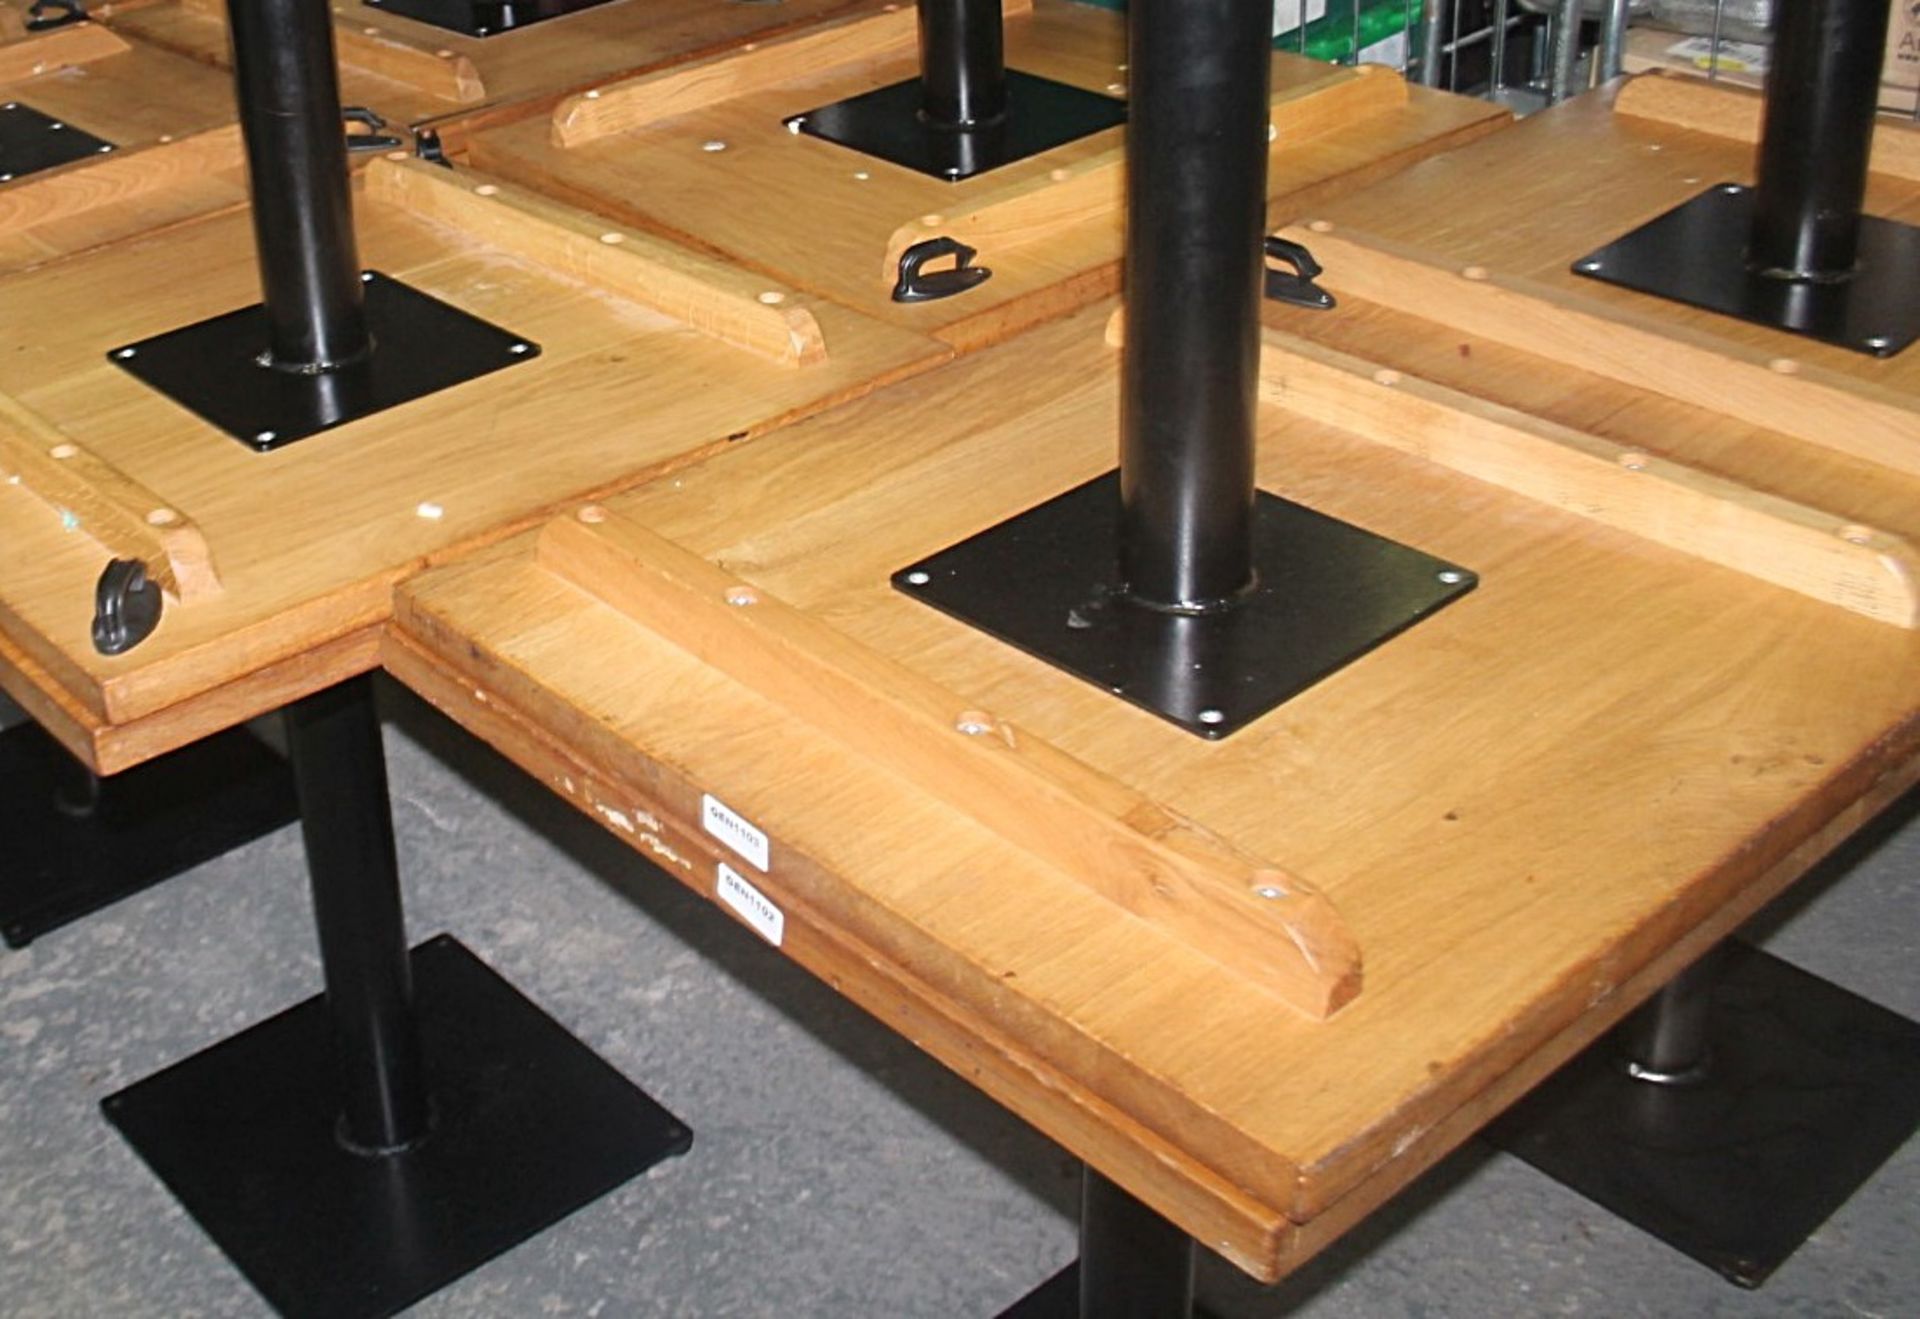 4 x Solid Oak Restaurant Dining Tables - Natural Rustic Knotty Oak Tops With Black Cast Iron Bases - Image 2 of 4